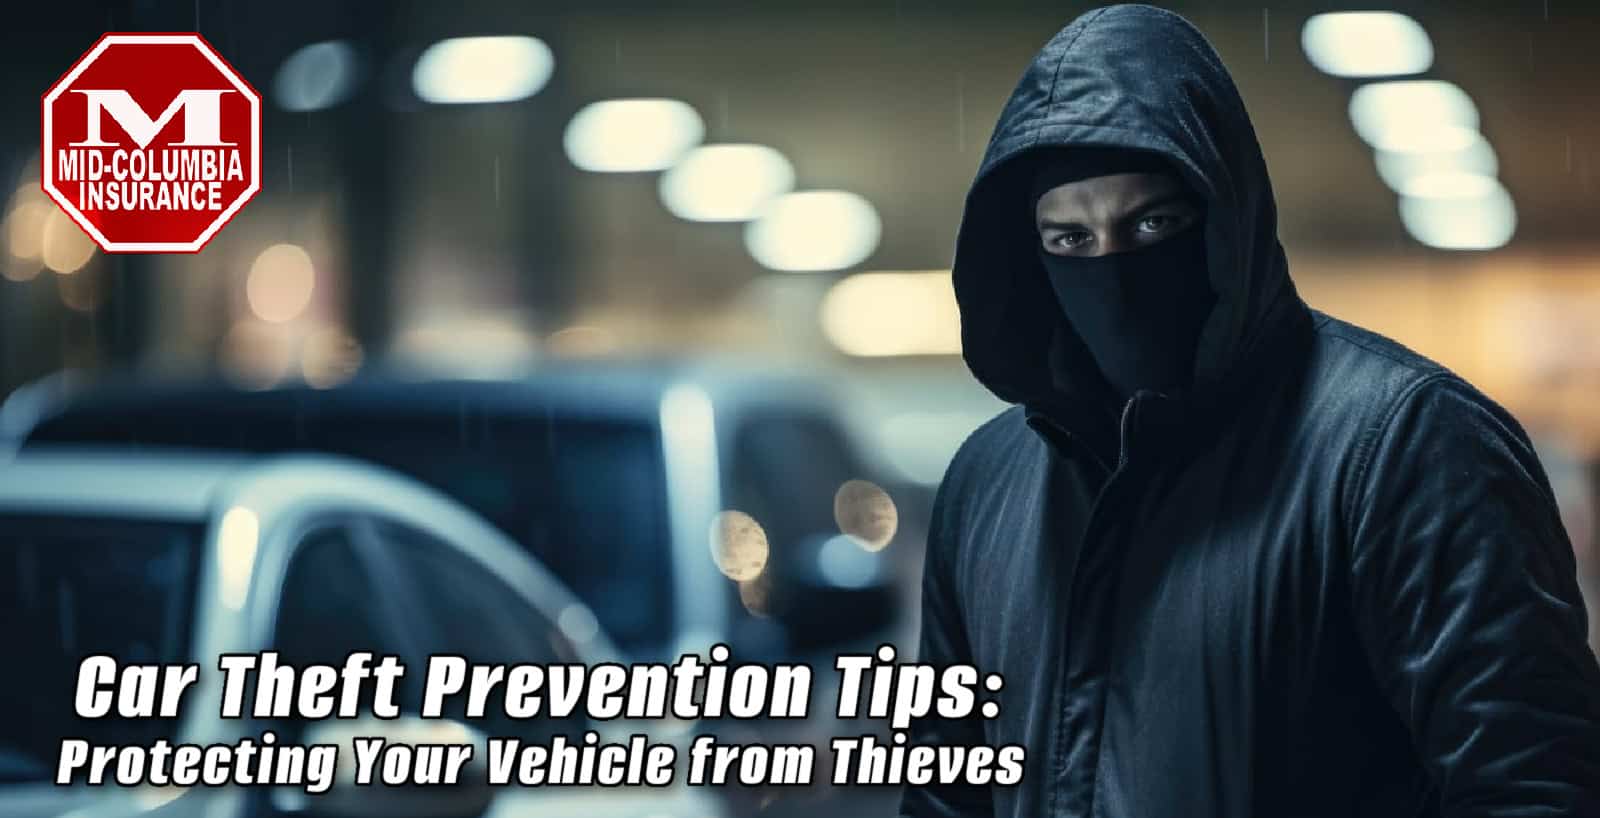 is-your-car-safe?-learn-top-theft-prevention-tricks